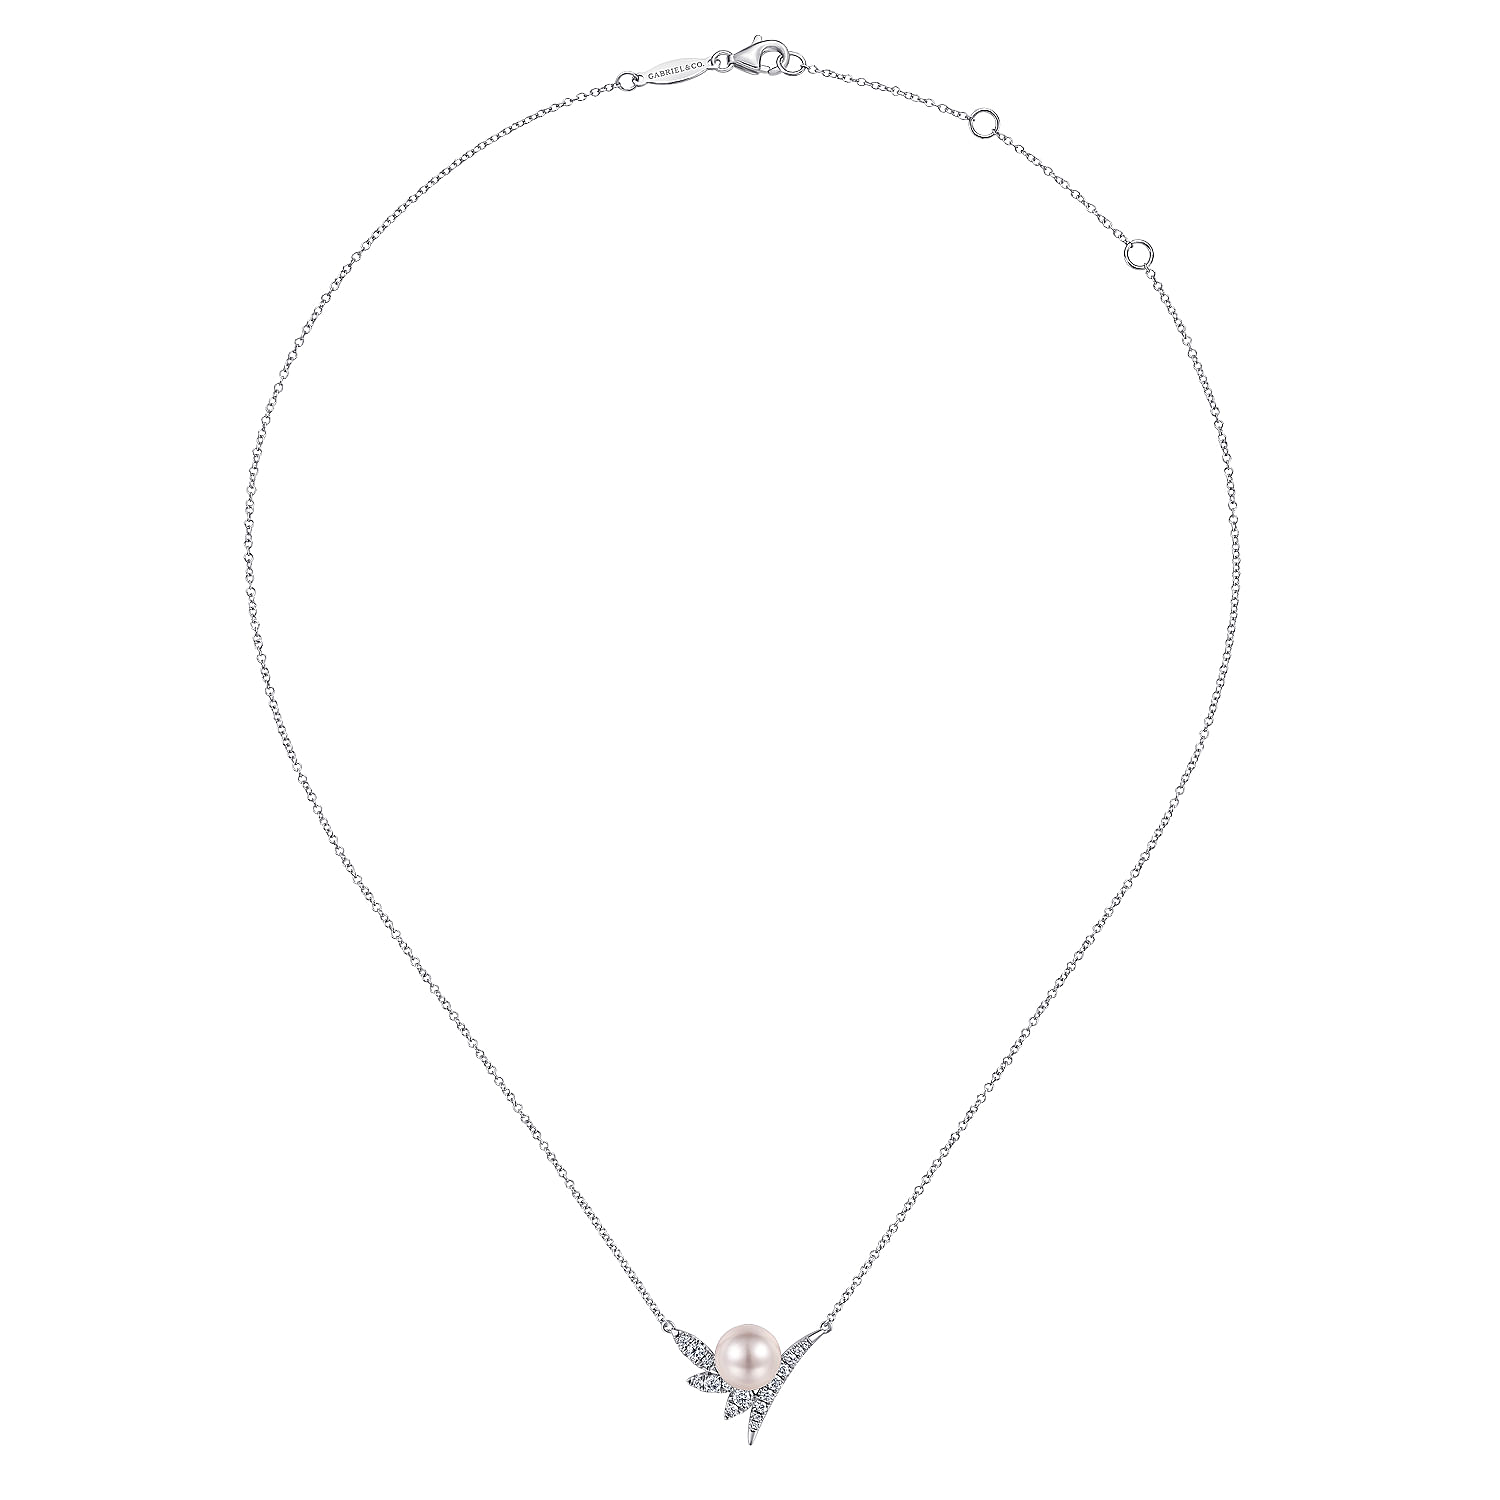 14K White Gold Diamond and Pearl Necklace